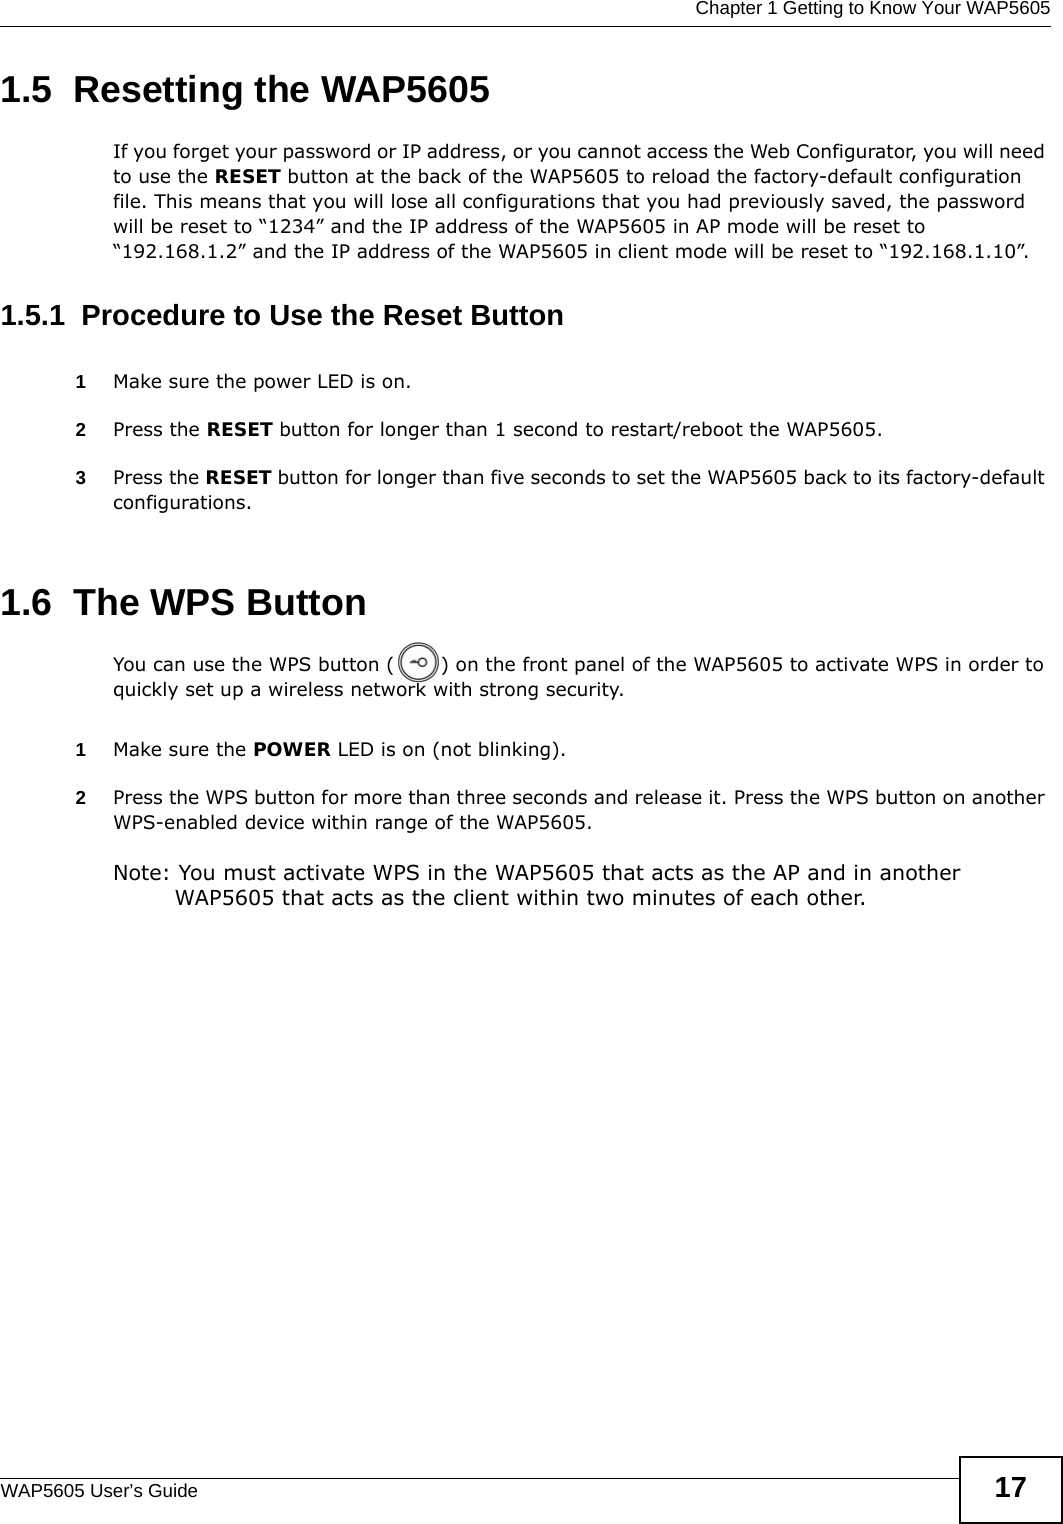  Chapter 1 Getting to Know Your WAP5605WAP5605 User’s Guide 171.5  Resetting the WAP5605If you forget your password or IP address, or you cannot access the Web Configurator, you will need to use the RESET button at the back of the WAP5605 to reload the factory-default configuration file. This means that you will lose all configurations that you had previously saved, the password will be reset to “1234” and the IP address of the WAP5605 in AP mode will be reset to “192.168.1.2” and the IP address of the WAP5605 in client mode will be reset to “192.168.1.10”.1.5.1  Procedure to Use the Reset Button1Make sure the power LED is on.2Press the RESET button for longer than 1 second to restart/reboot the WAP5605.3Press the RESET button for longer than five seconds to set the WAP5605 back to its factory-default configurations.1.6  The WPS ButtonYou can use the WPS button ( ) on the front panel of the WAP5605 to activate WPS in order to quickly set up a wireless network with strong security.1Make sure the POWER LED is on (not blinking).2Press the WPS button for more than three seconds and release it. Press the WPS button on another WPS-enabled device within range of the WAP5605. Note: You must activate WPS in the WAP5605 that acts as the AP and in another WAP5605 that acts as the client within two minutes of each other. 